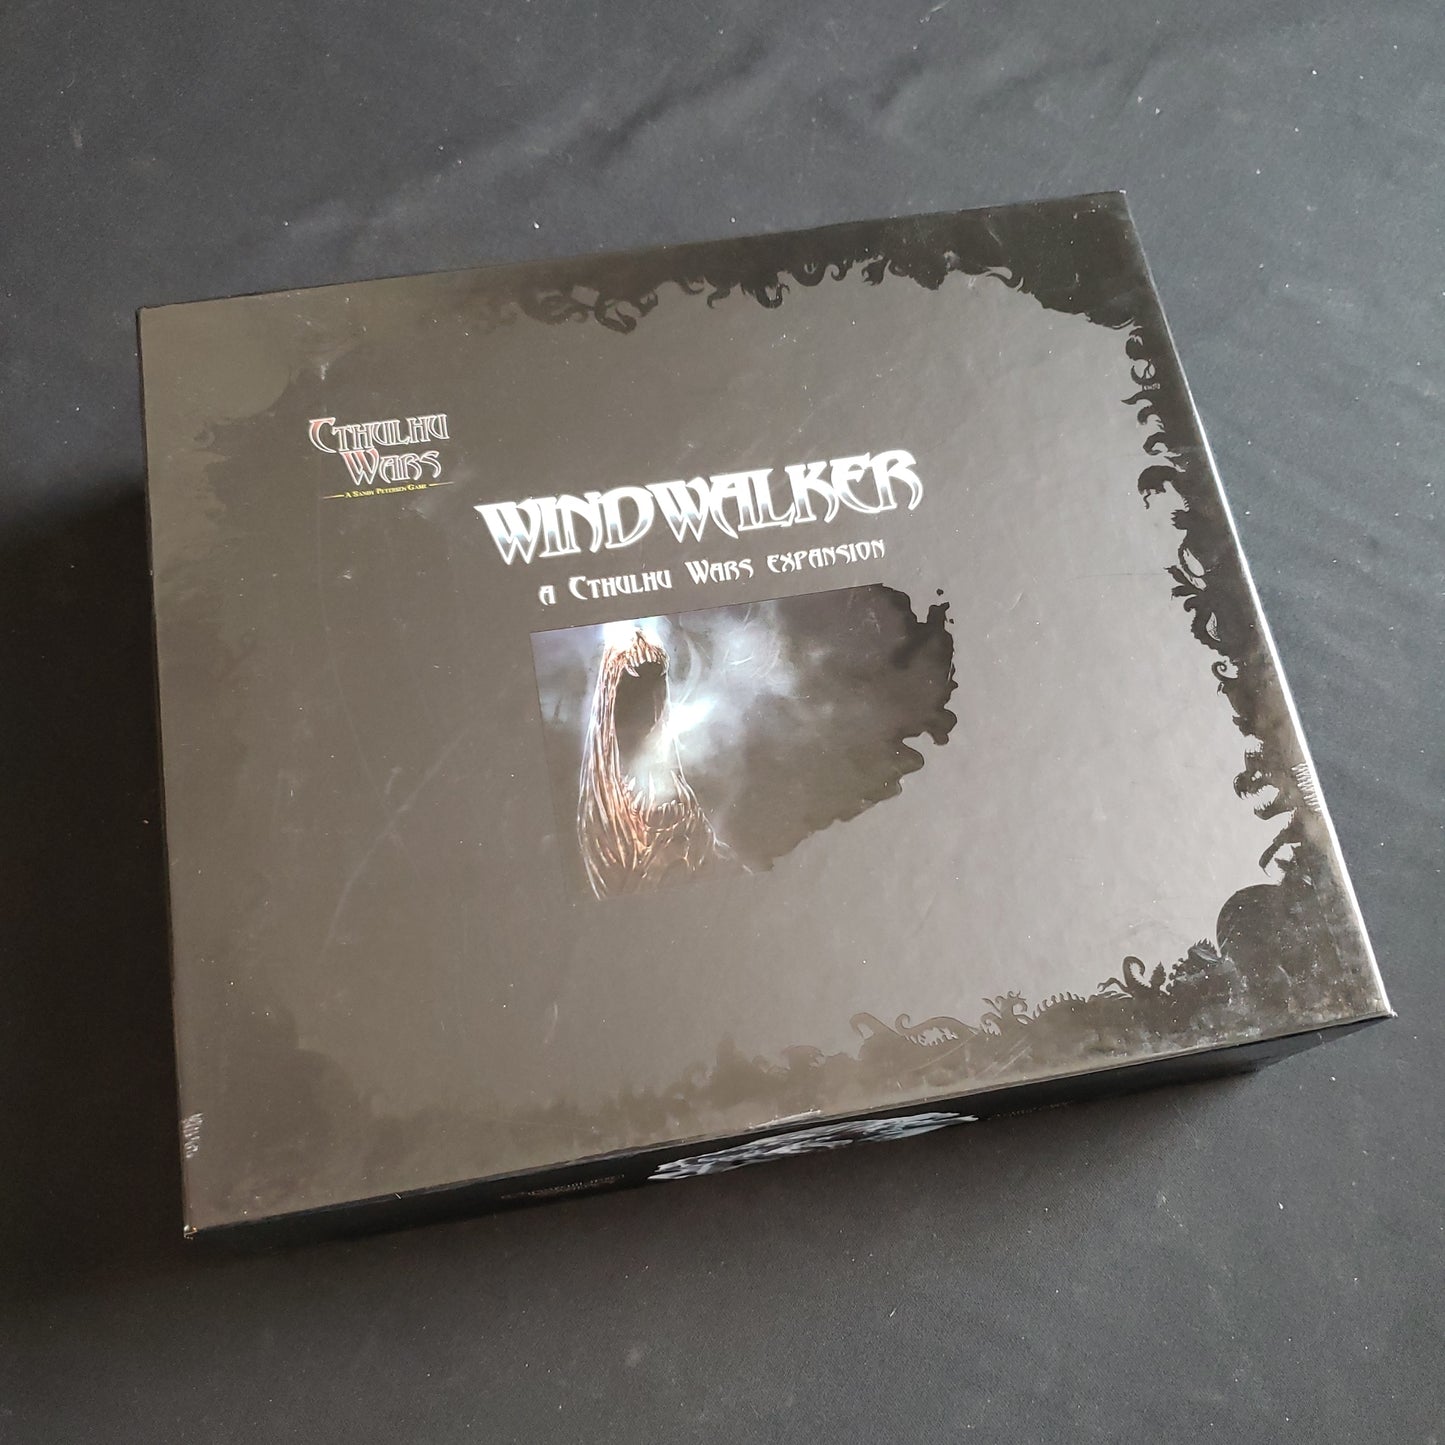 Image shows the front of the box for the Windwalker Expansion for the Cthulhu Wars board game